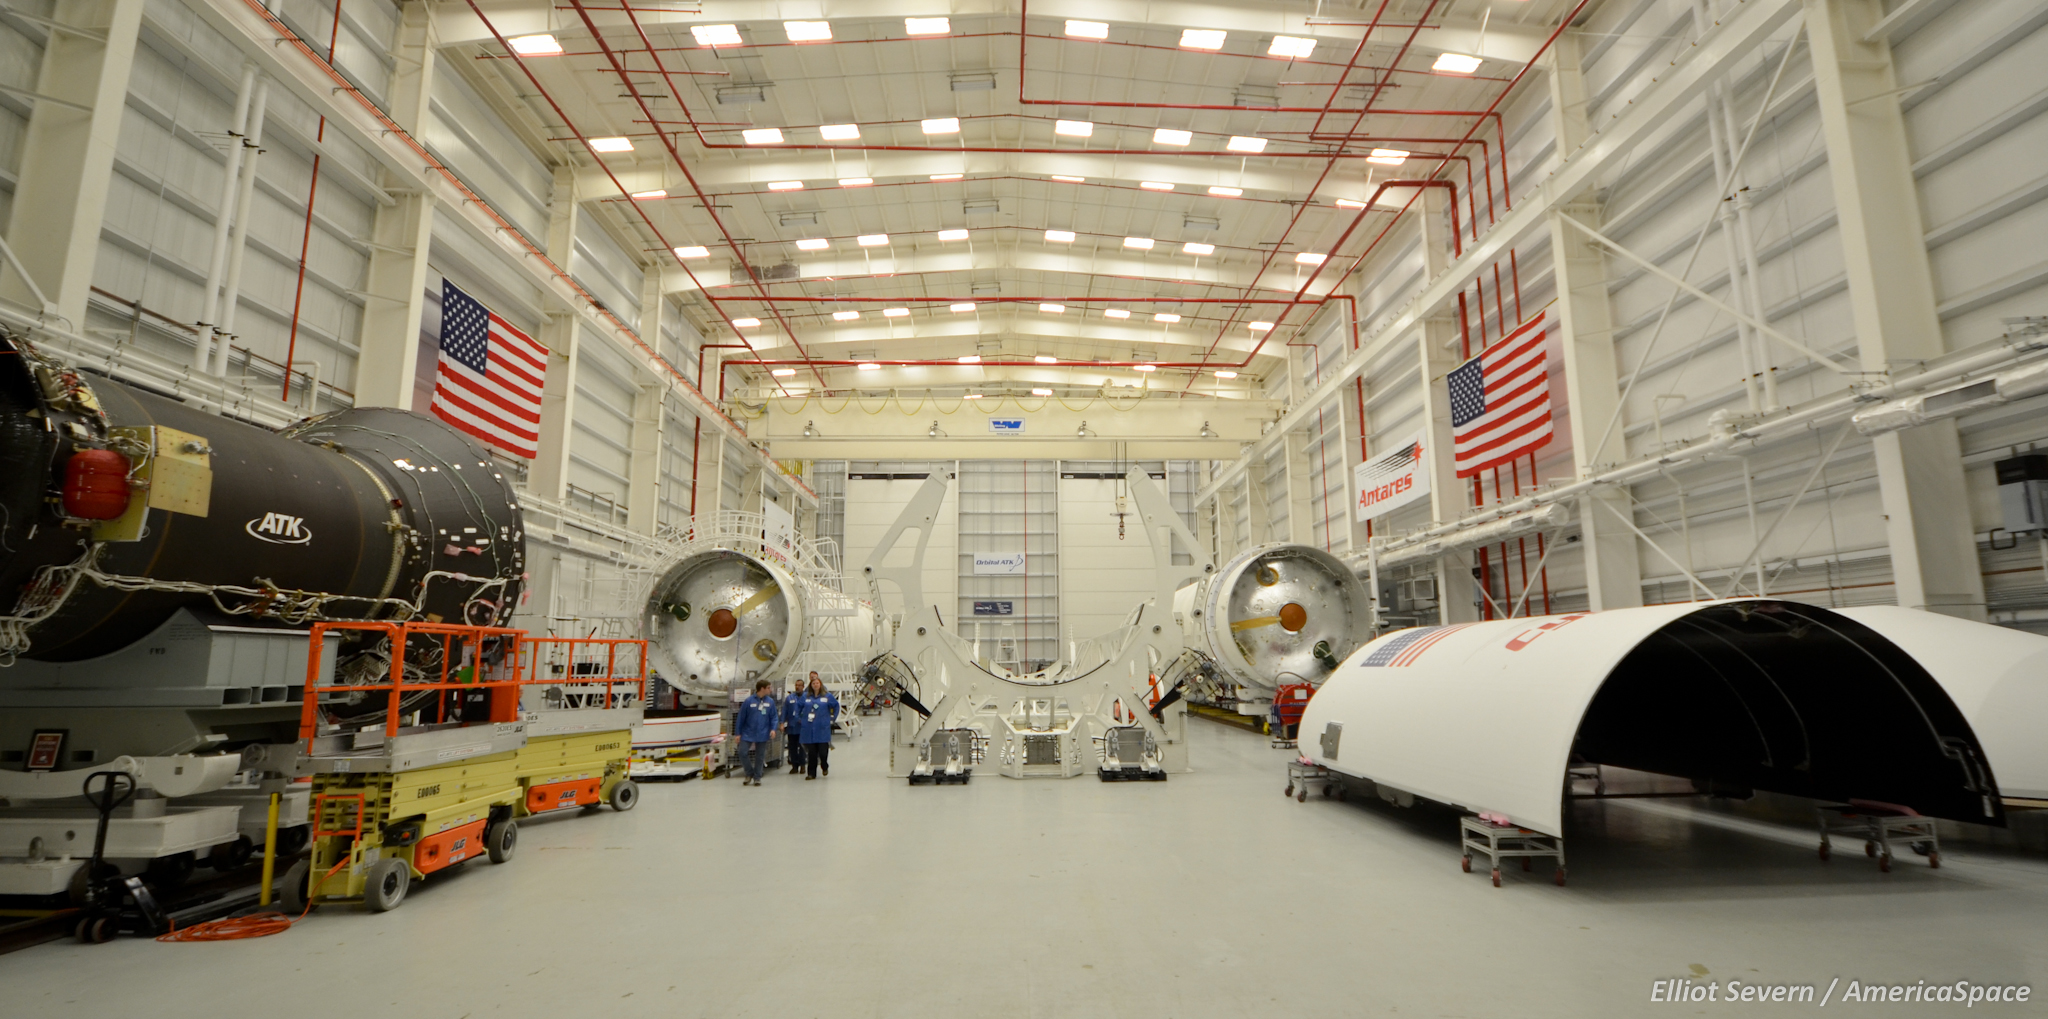 Two Antares vehicles being processed in the HIF at Wallops Island. Photo Credit: Elliot Severn / AmericaSpace